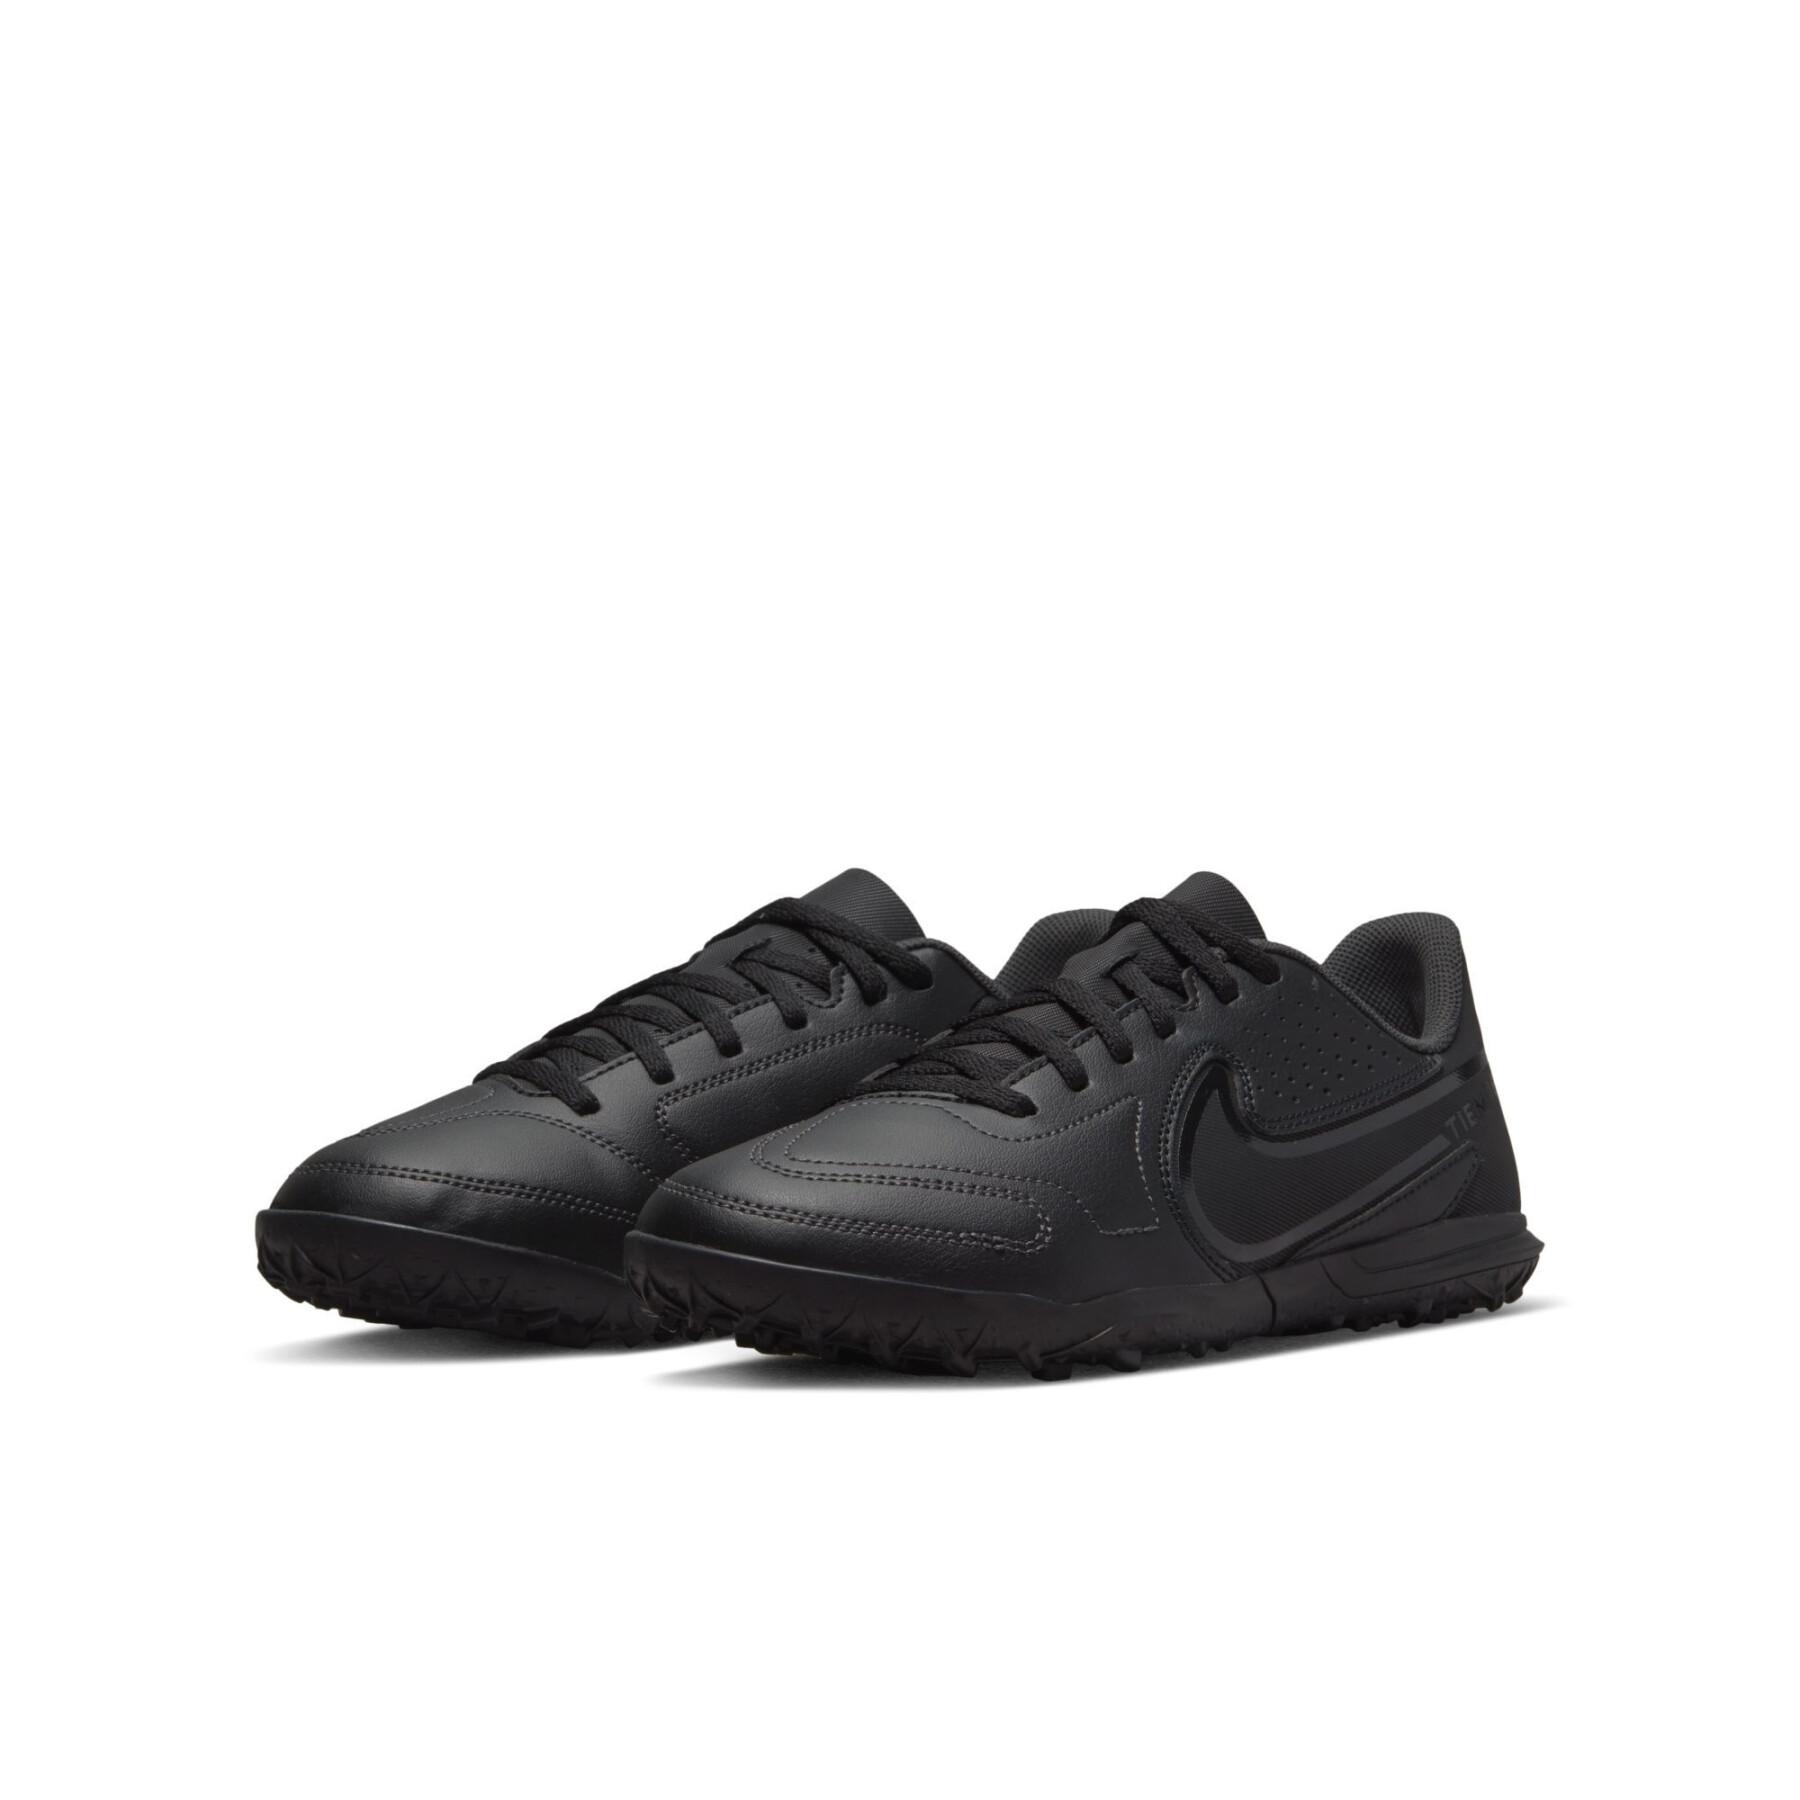 Children's soccer shoes Nike Tiempo Legend 9 Club TF - Shadow Black Pack